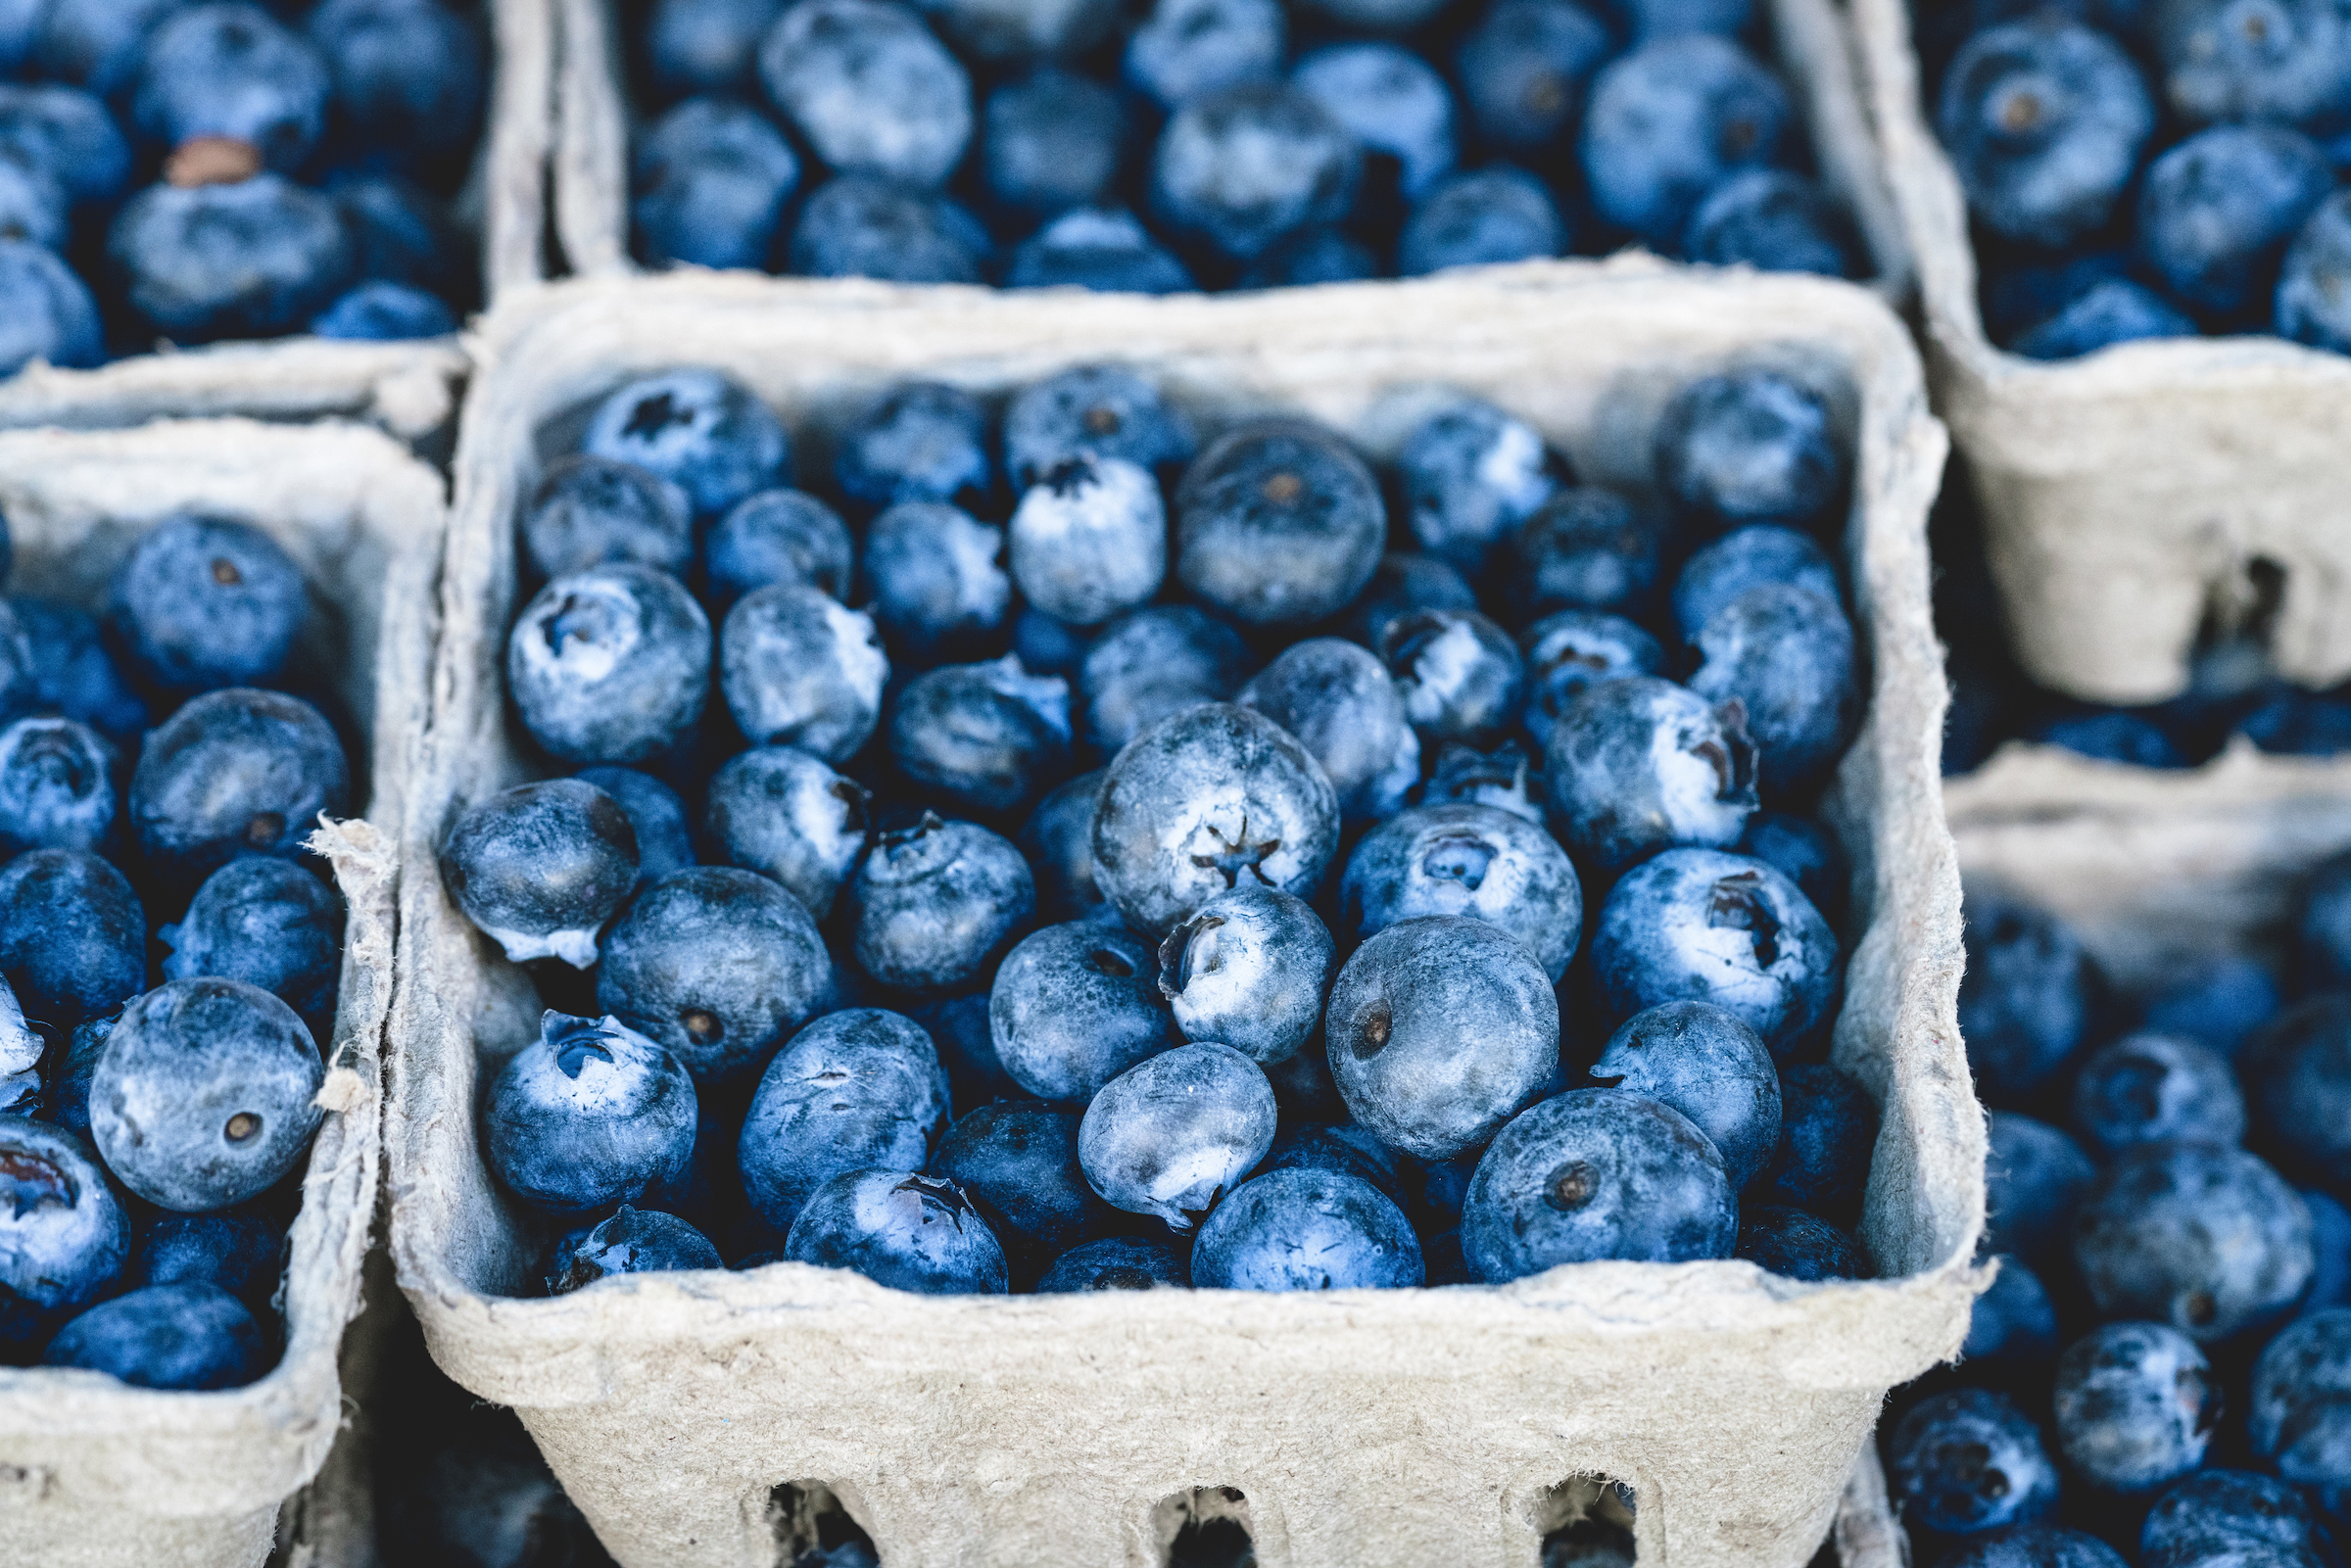 Blueberry grading consistent quality